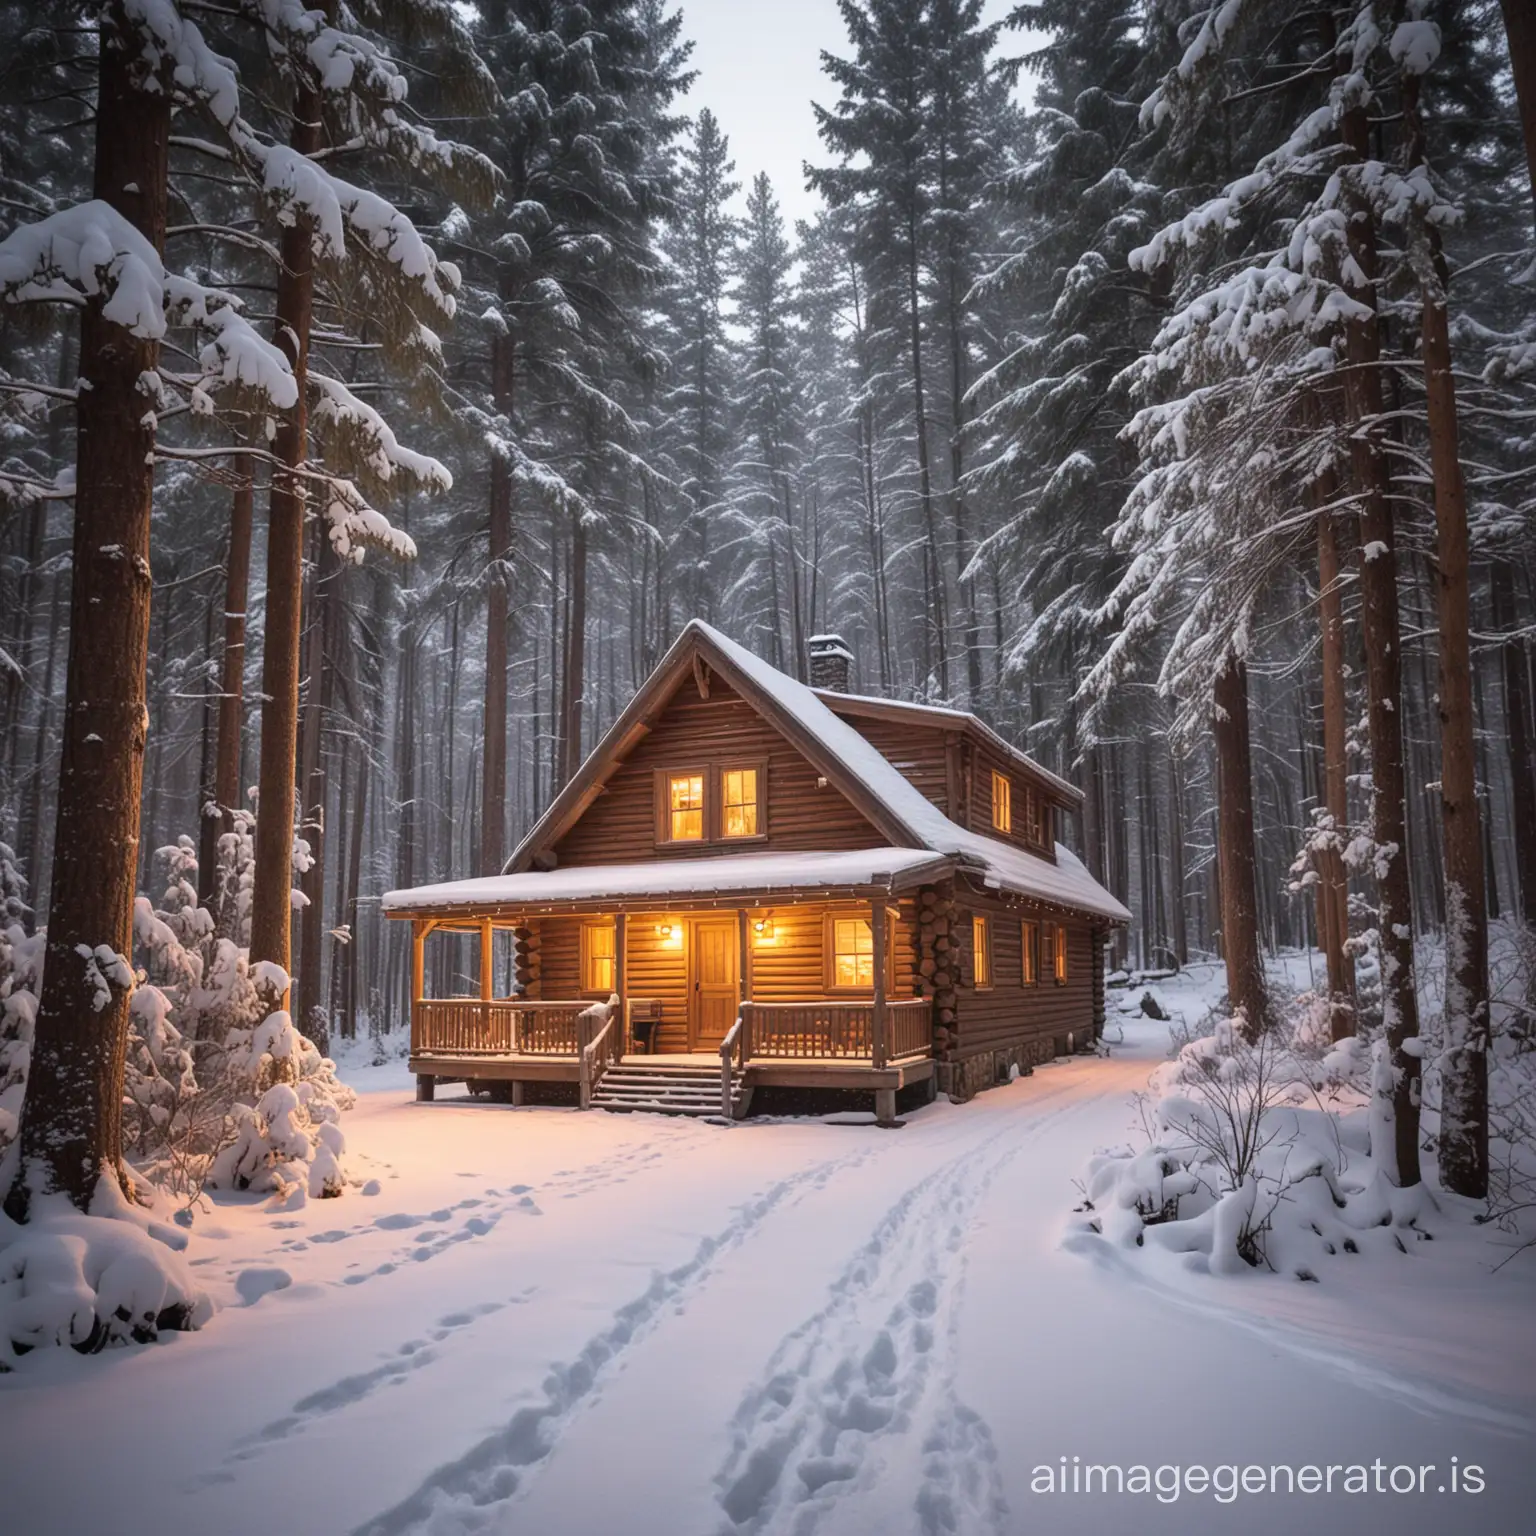 a cabin, heavy forest, snowy weather, warm scene, winter wonderland, cozy atmosphere, log cabin, snow-covered trees, peaceful setting, soft glow, inviting, winter getaway, tranquil, idyllic retreat, cold climate, snowfall, serene landscape